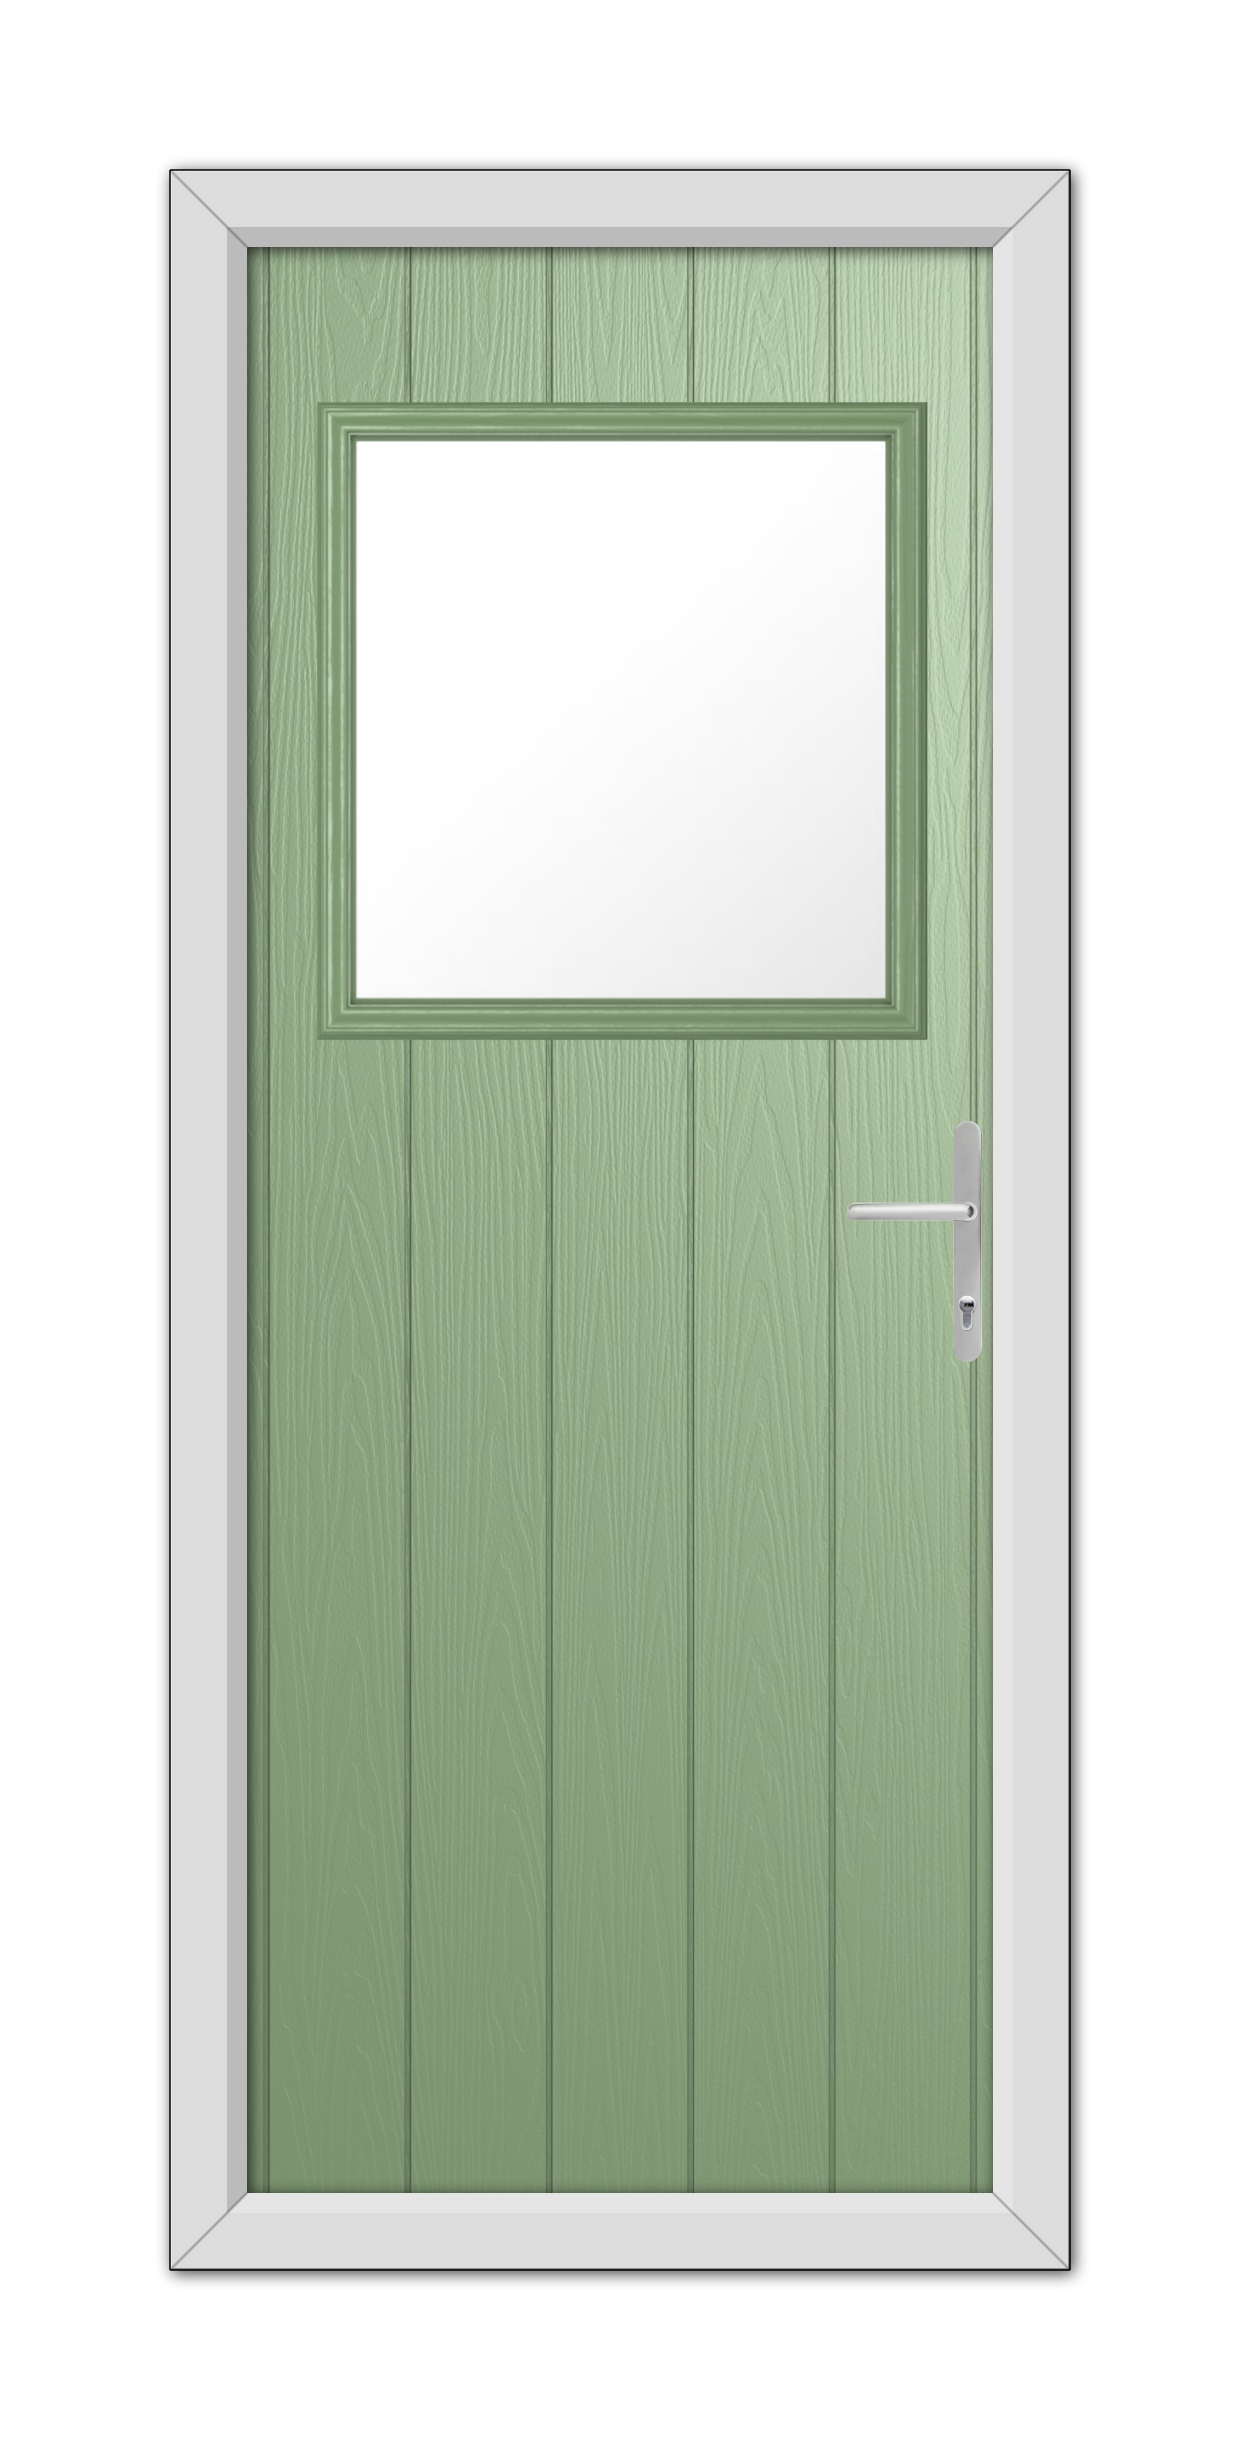 A Chartwell Green Fife Composite Door 48mm Timber Core with a rectangular glass window at the top, framed in white, featuring a modern handle on the right side.